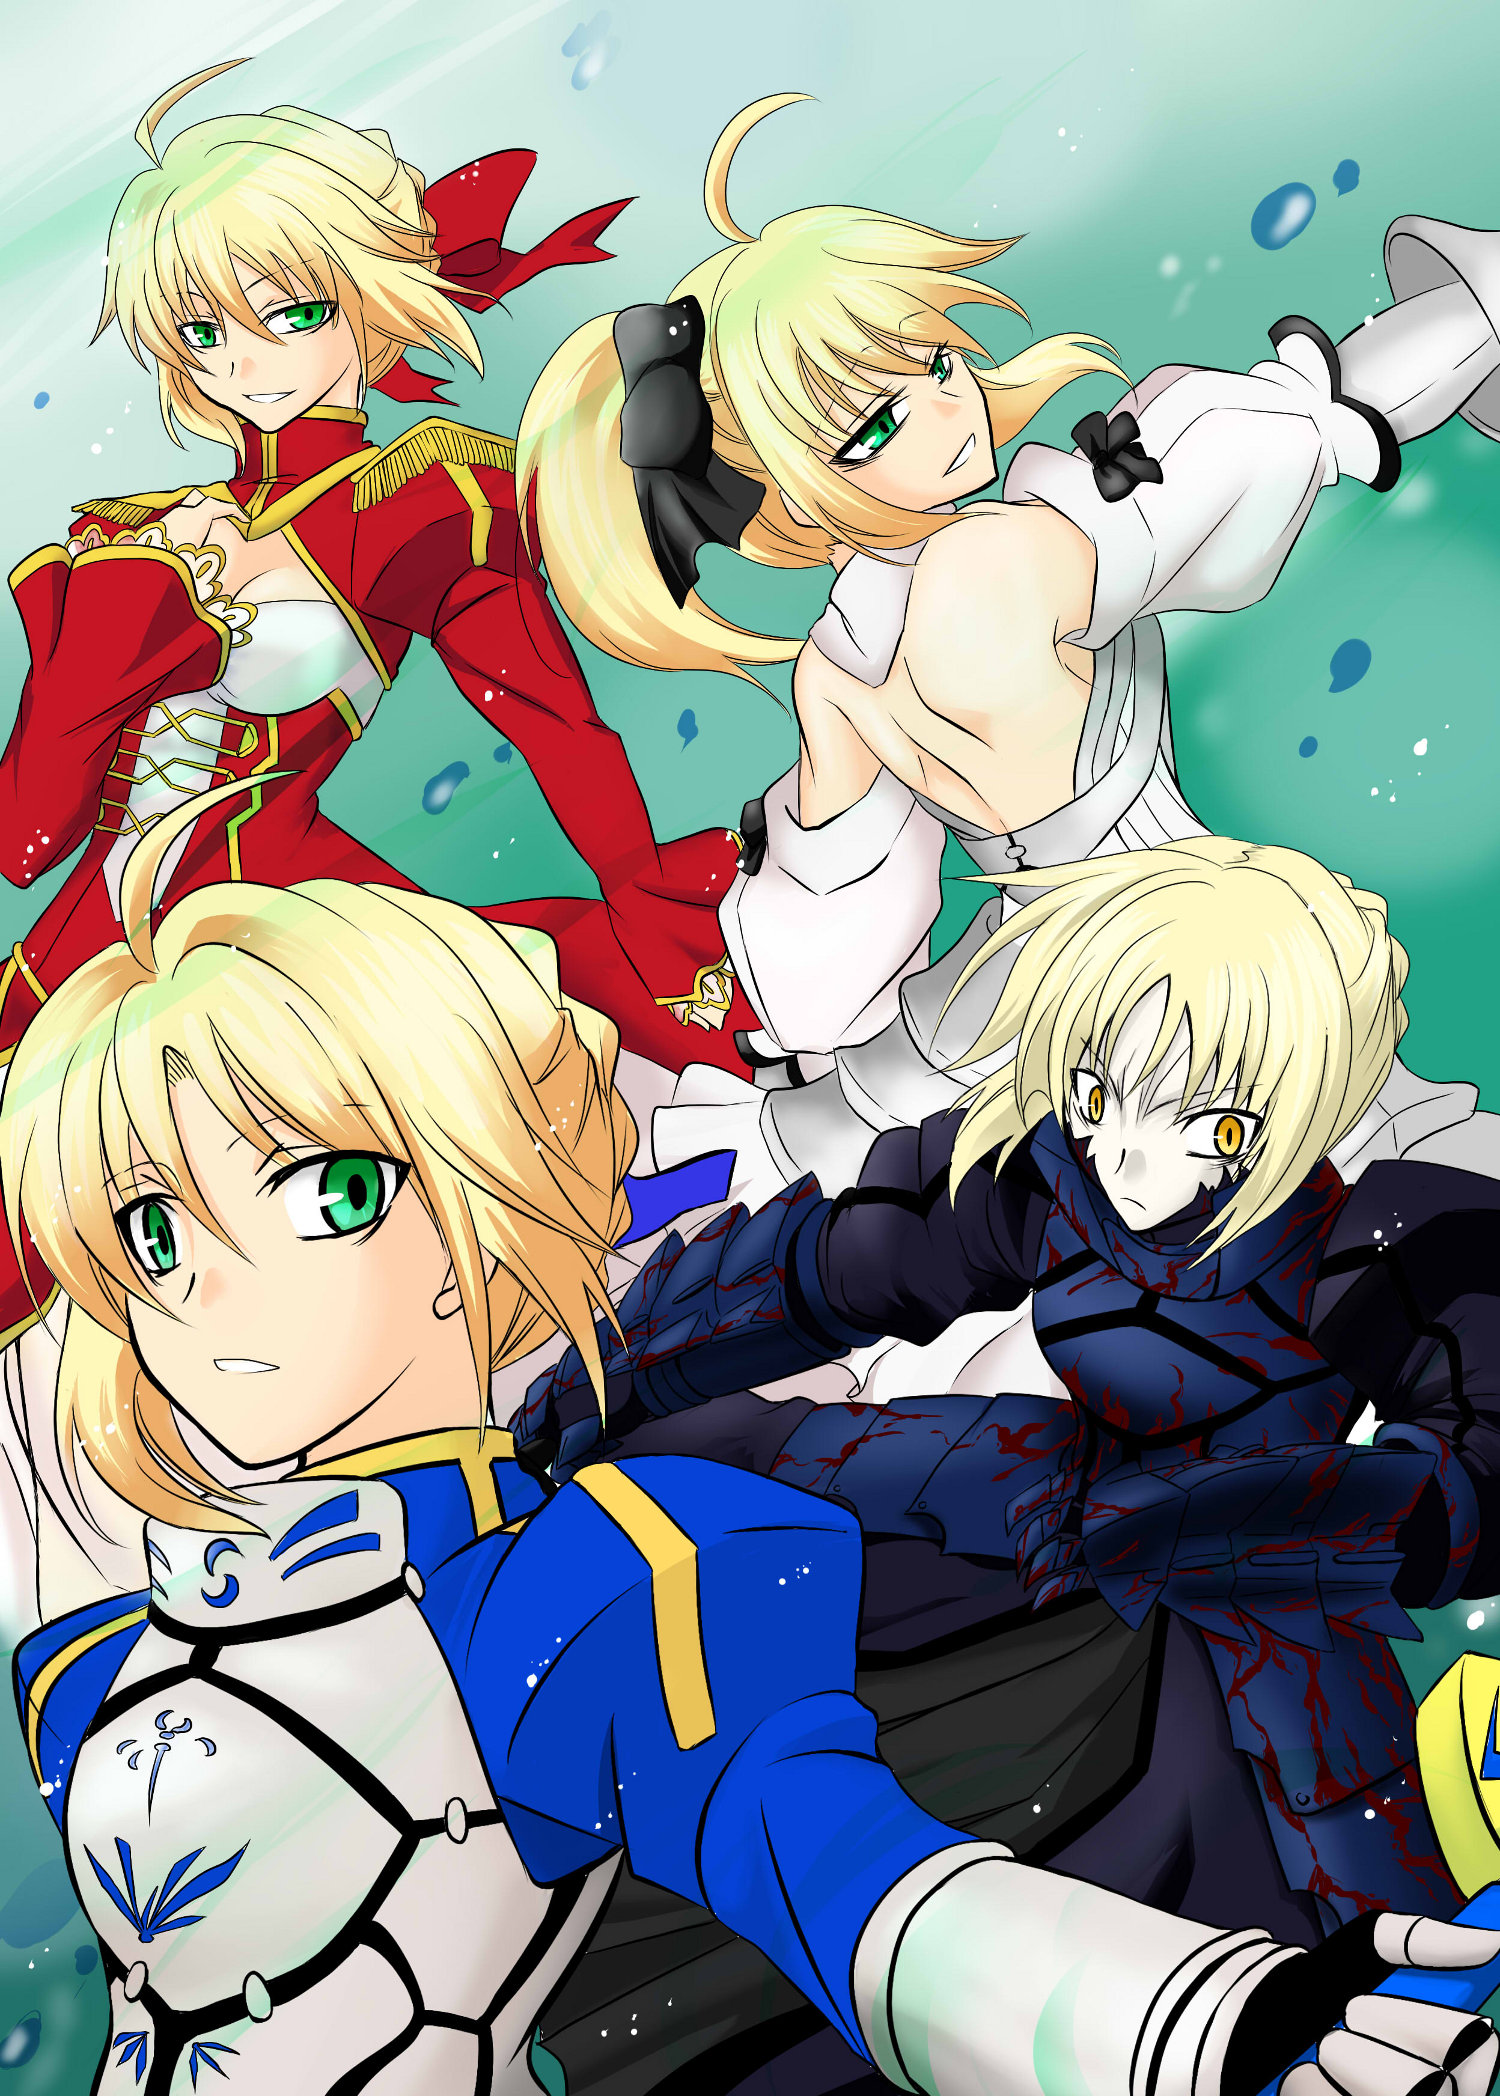 Anime 1500x2096 anime anime girls Fate series Fate/Stay Night fate/stay night: heaven's feel Fate/Extra Fate/Extra CCC Fate/Unlimited Codes  Fate/Grand Order Artoria Pendragon Nero Claudius Saber Saber Alter Saber Lily blonde ponytail long hair boobs Excalibur artwork digital art fan art